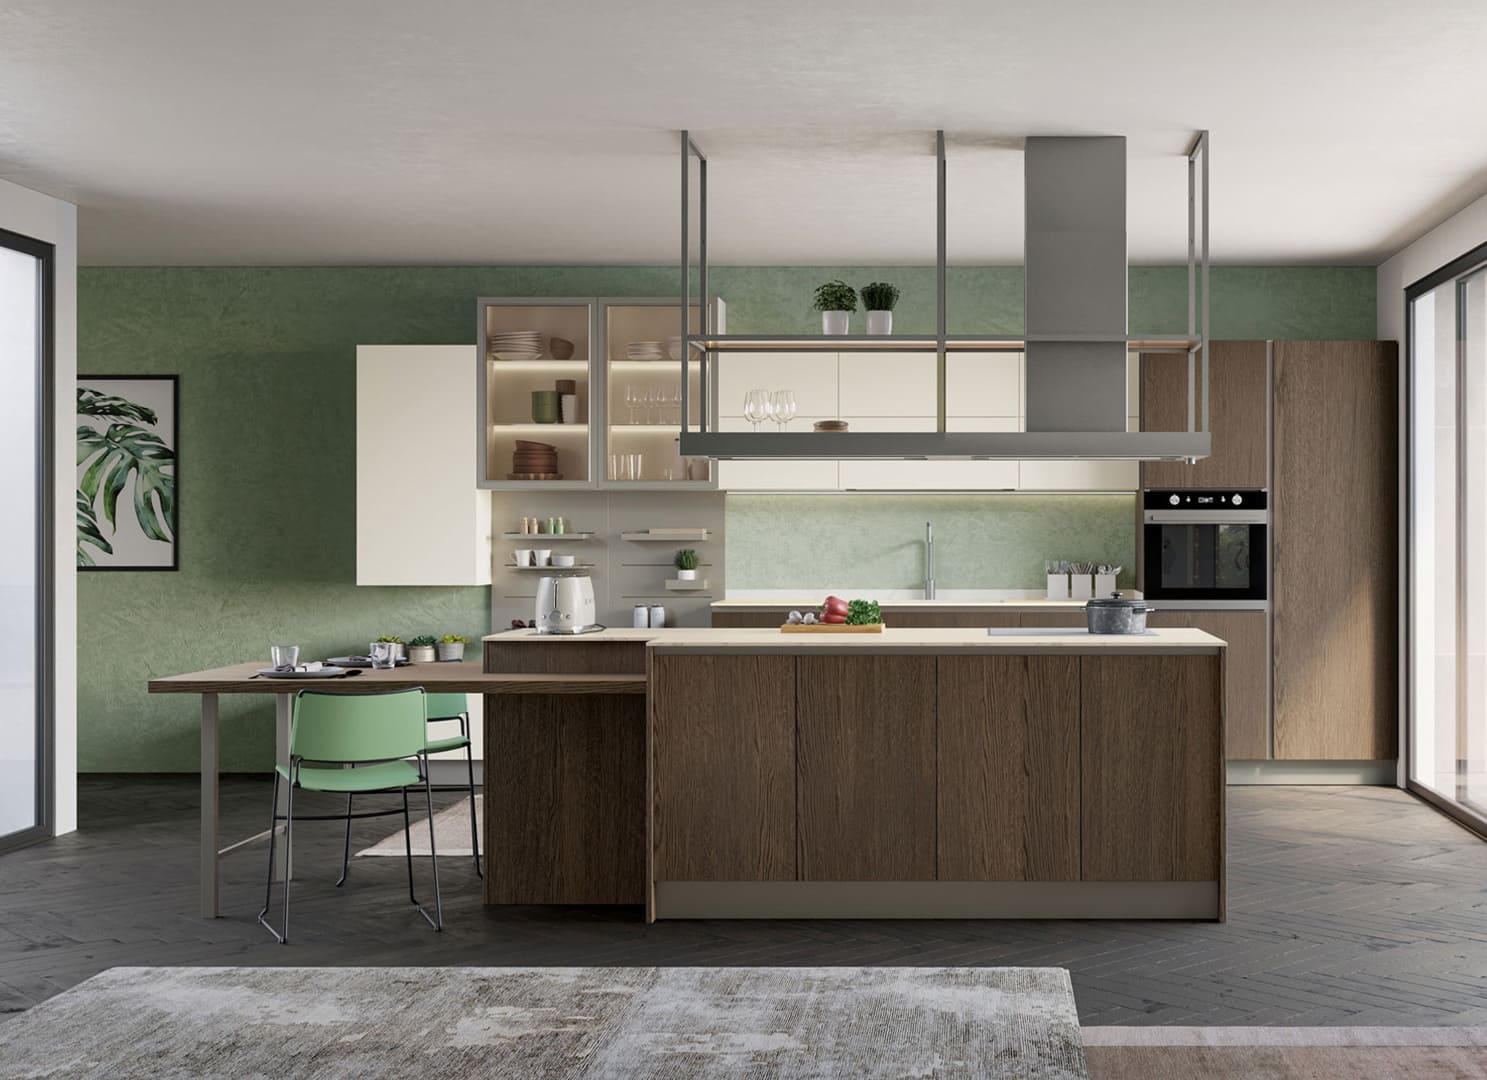 cucina-creo-kitchens-tablet-wood-composizione-4-4-nardo-lecce